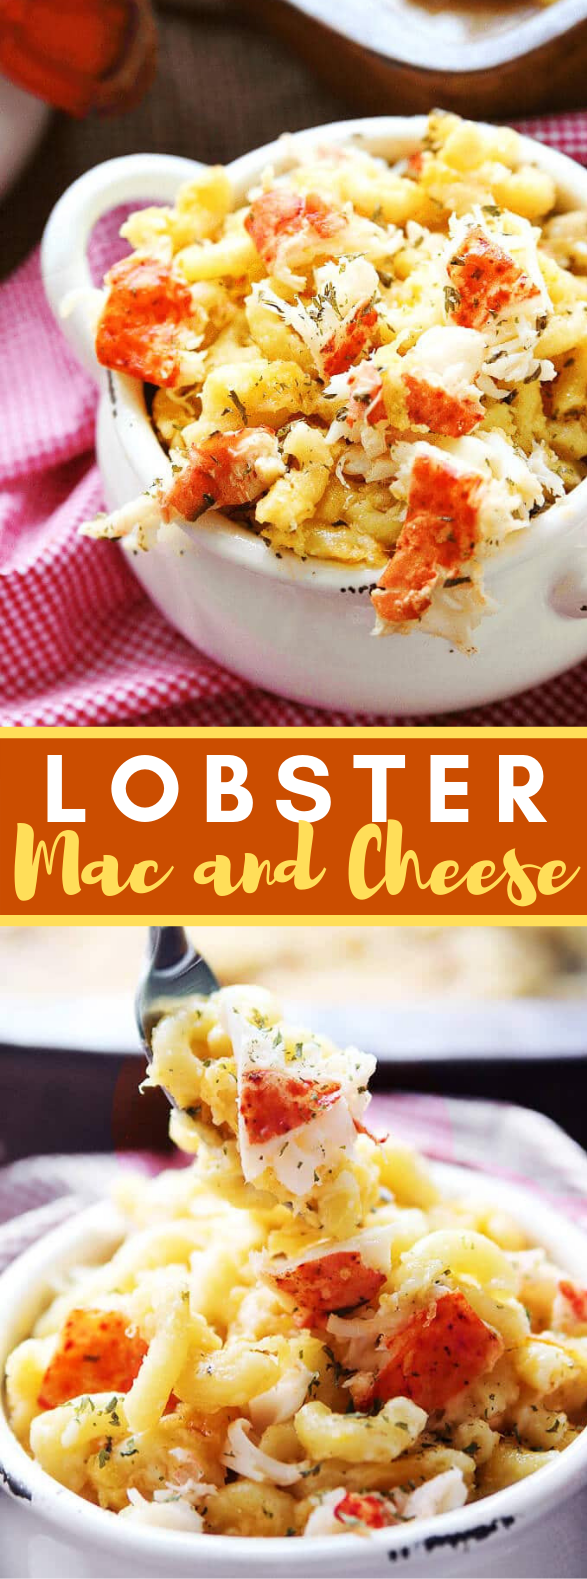 Lobster Mac and Cheese #dinner #seafood